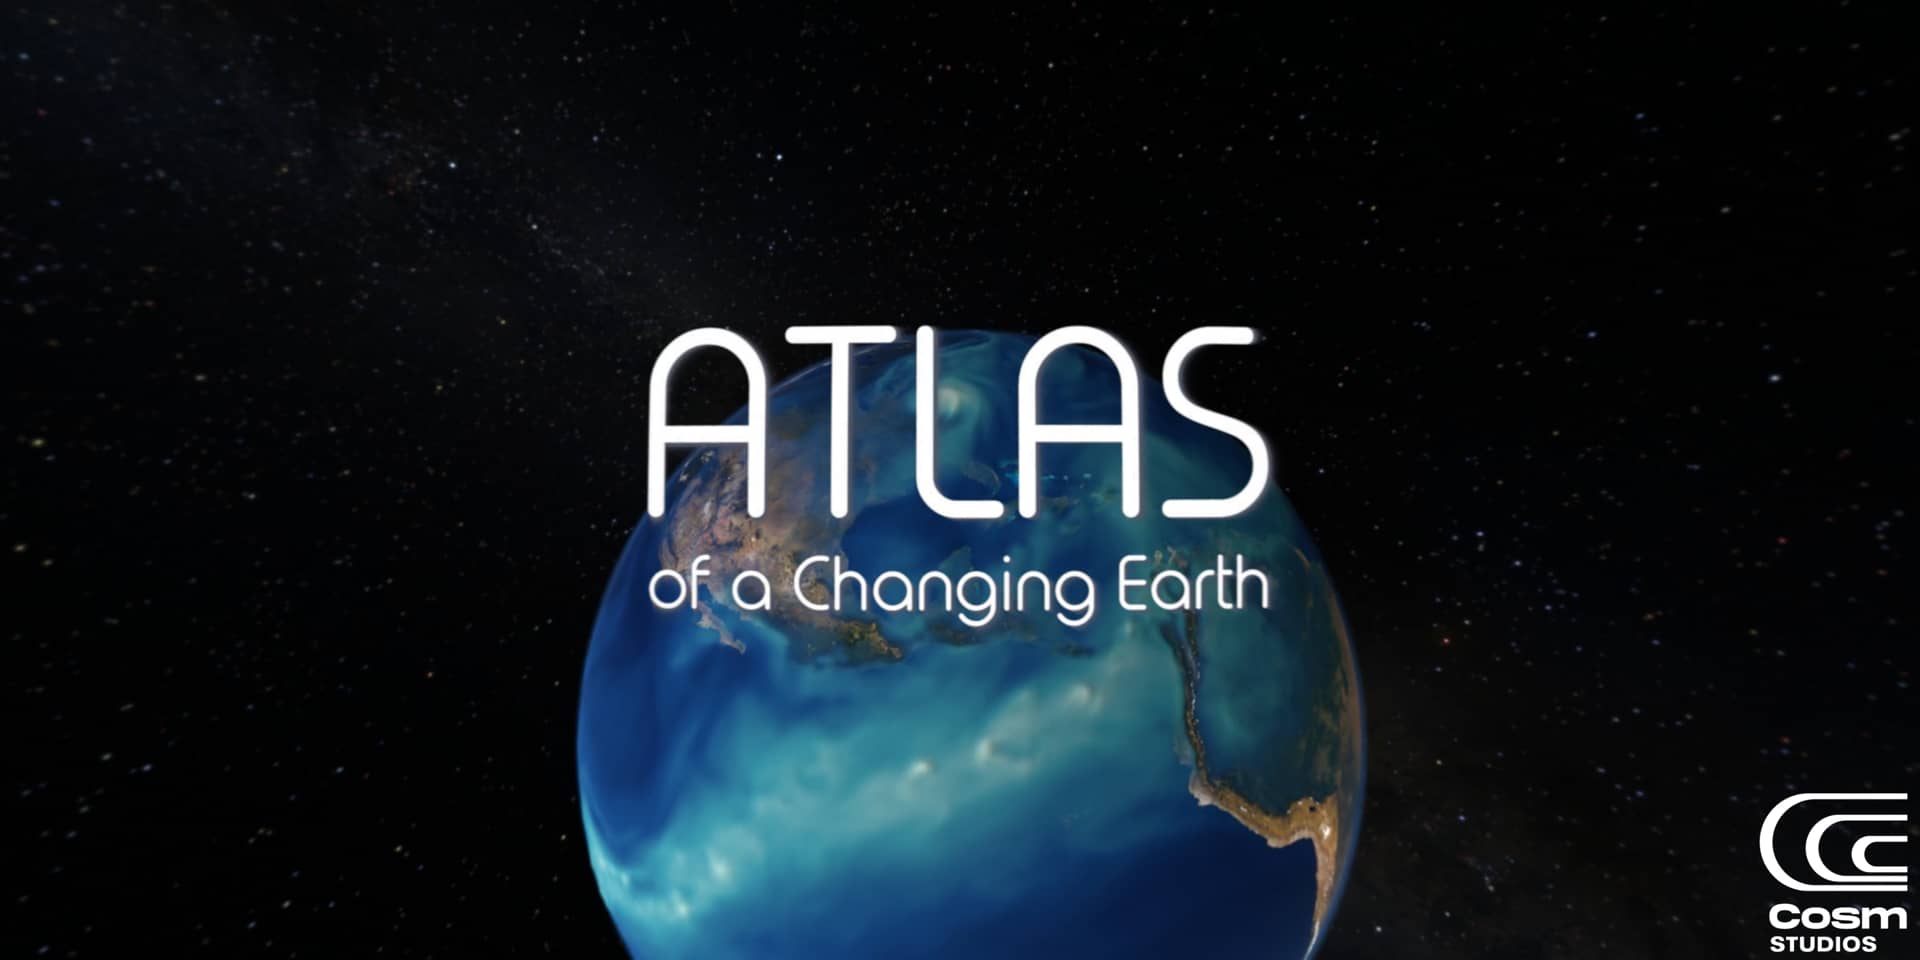 Atlas of a Changing Earth Trailer on Vimeo